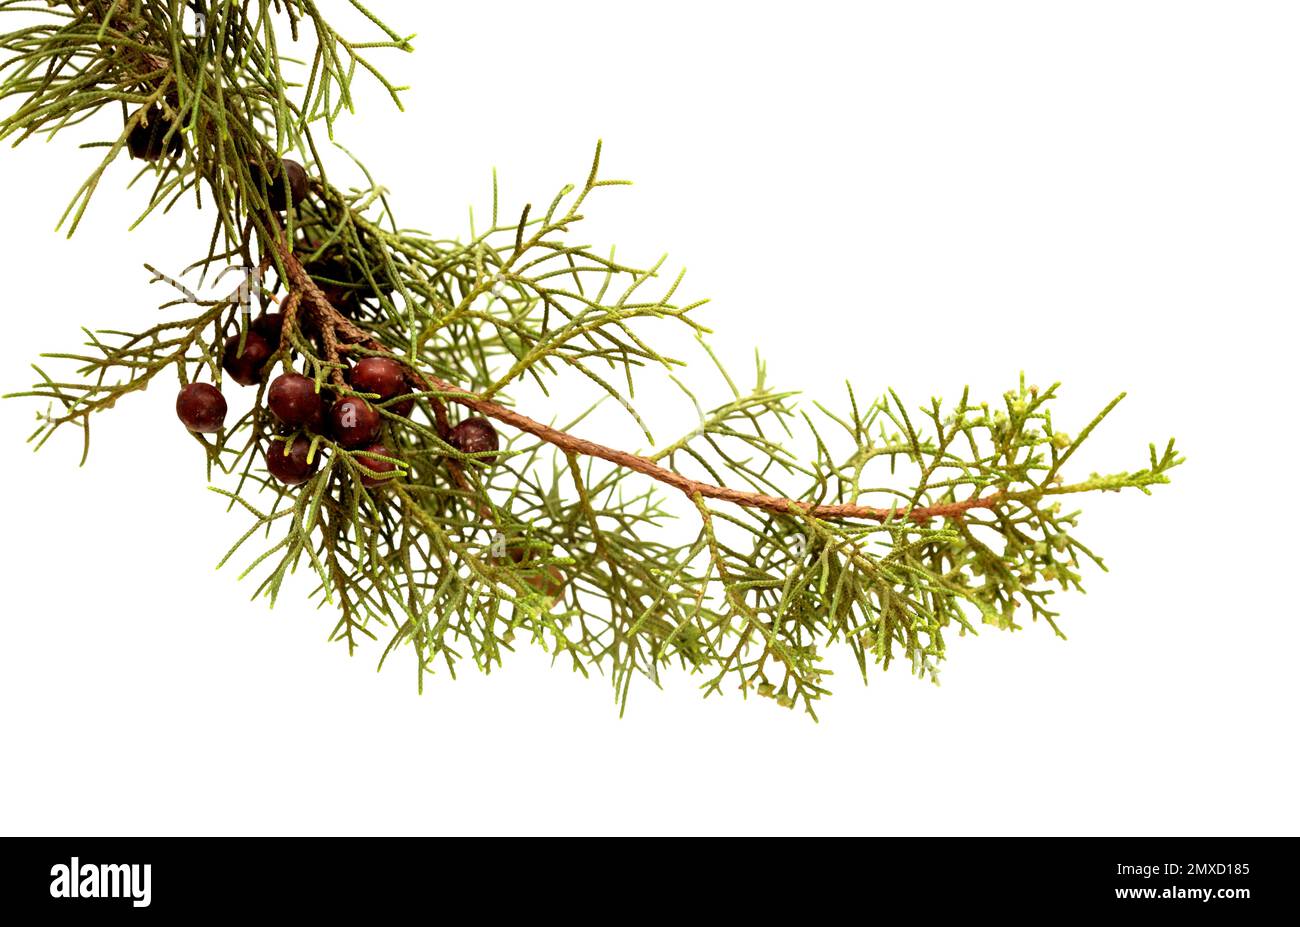 Flora of Gran Canaria - branch of Juniperus phoenicea, the Phoenicean juniper, isolated on white background Stock Photo